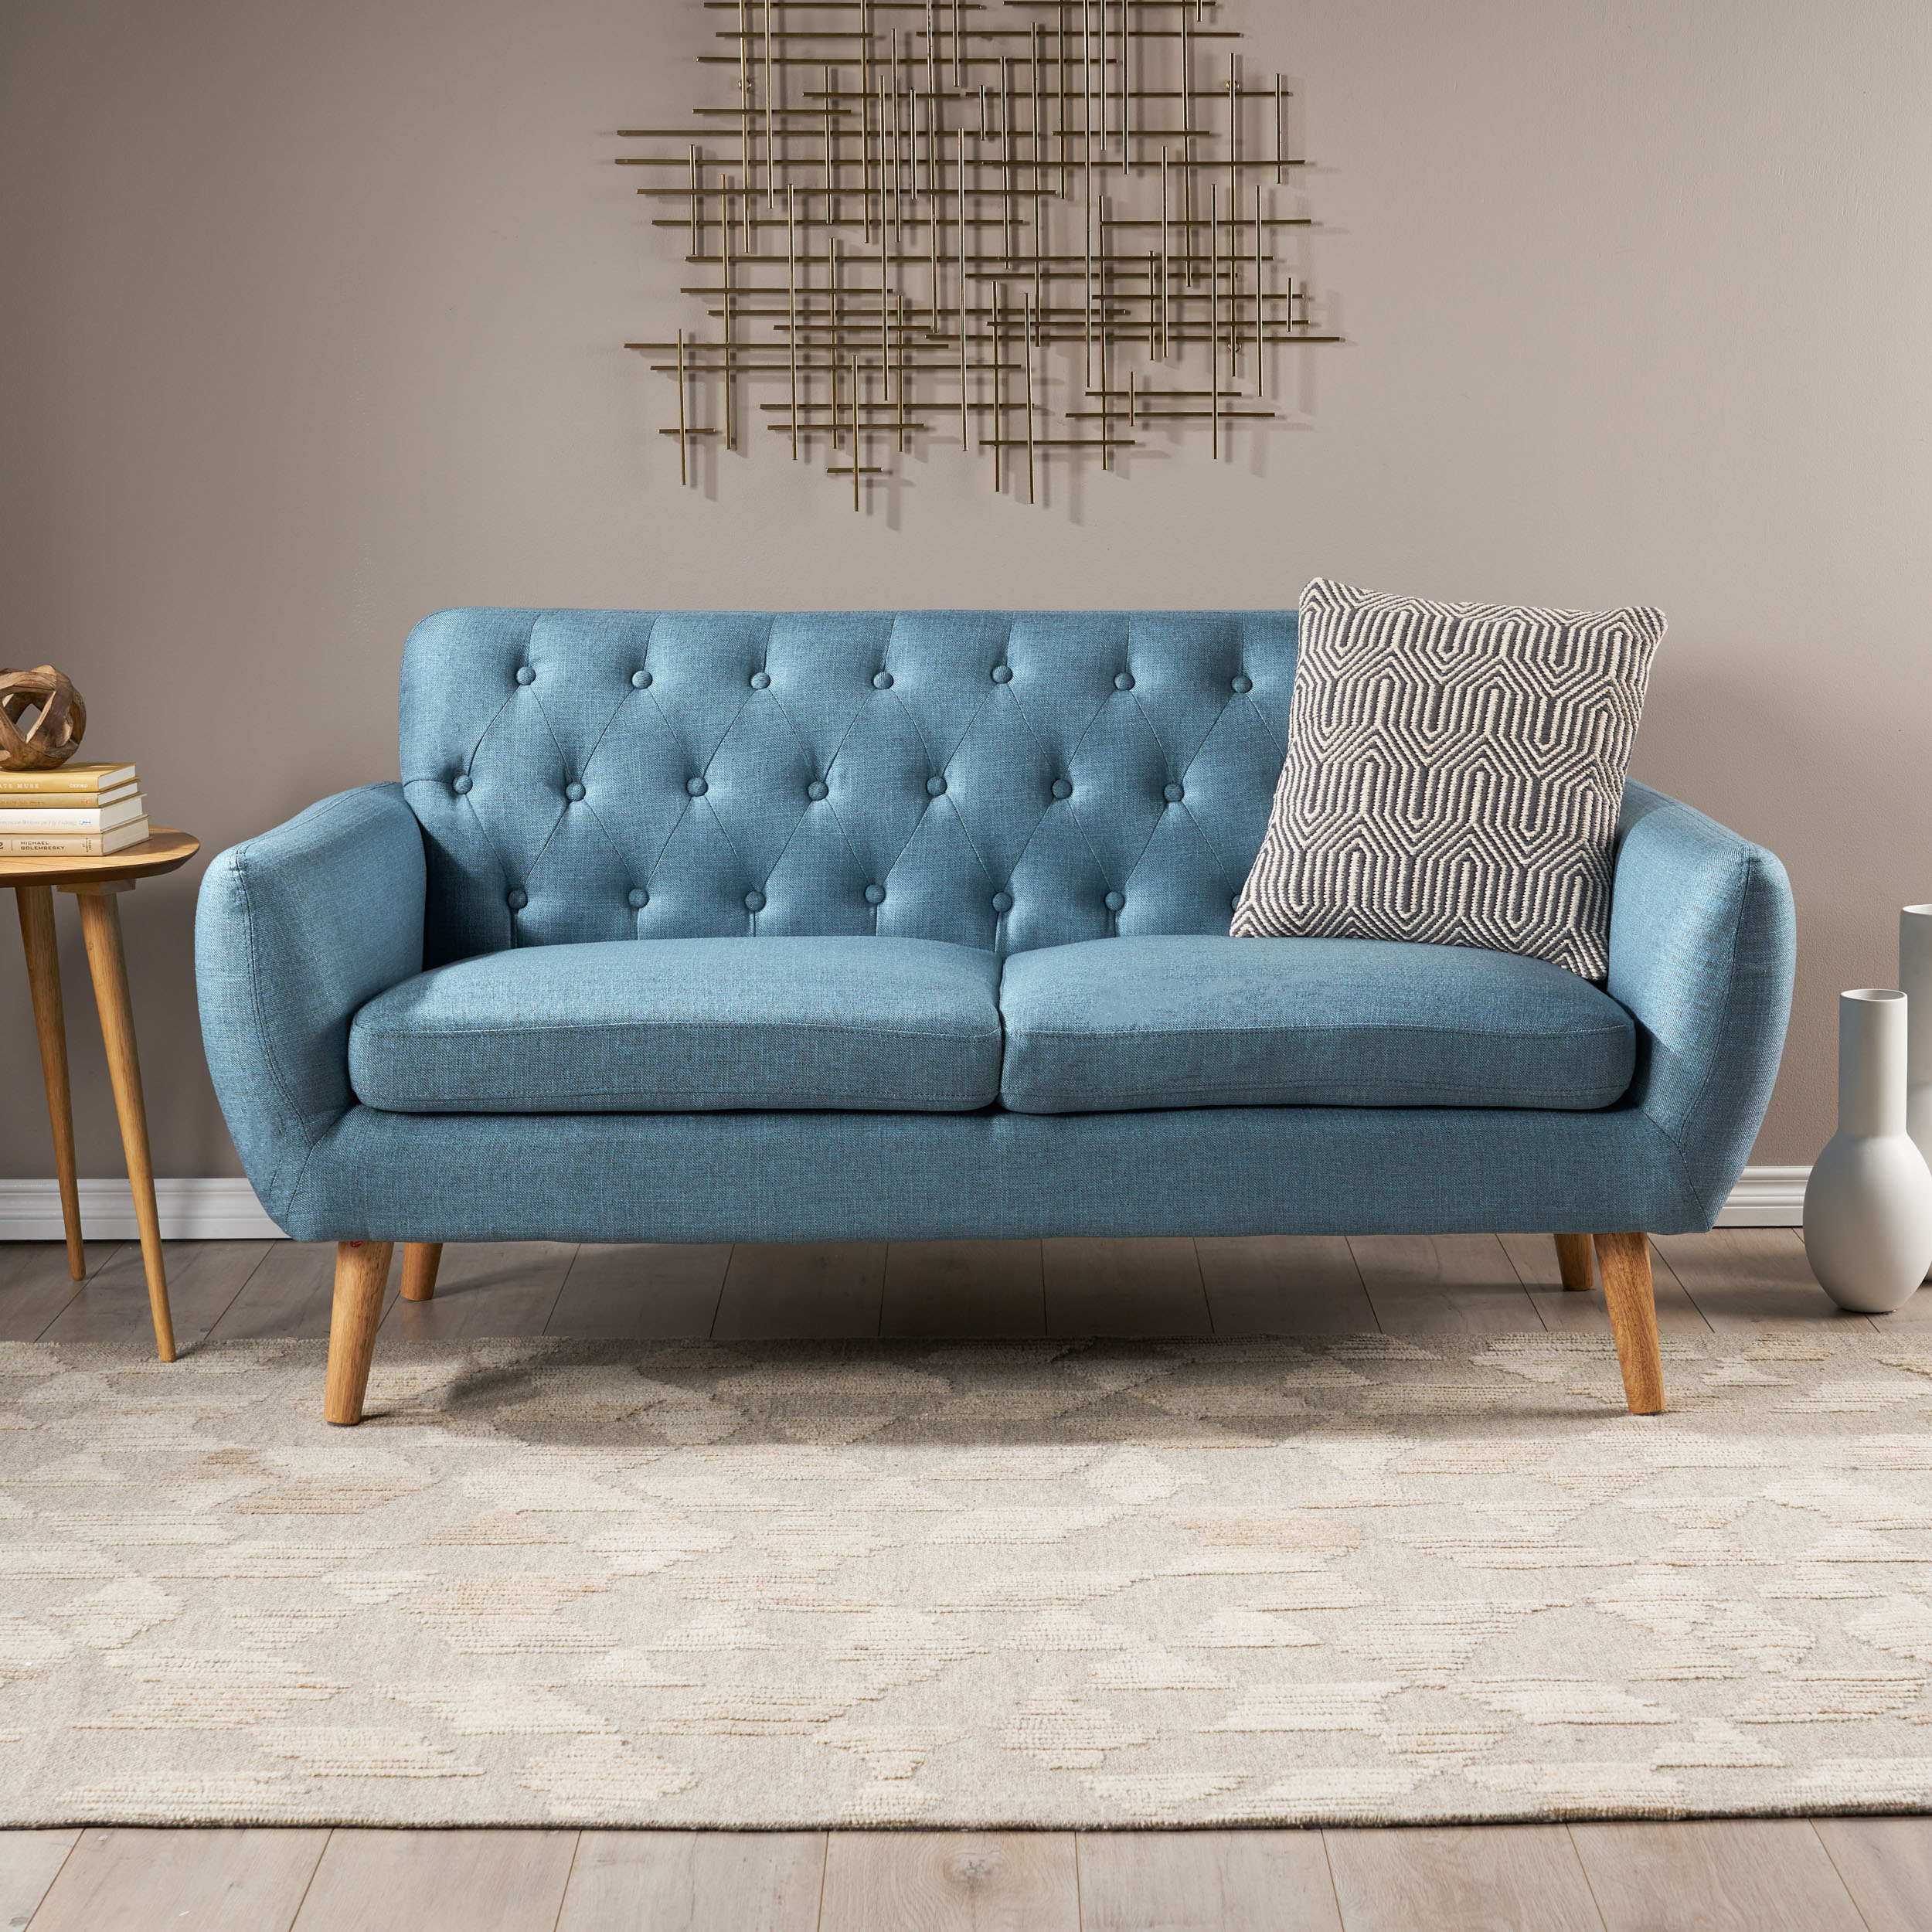 GDF Studio Alscot Mid Century Modern Fabric Tufted Oversized Loveseat, Blue and Natural - image 1 of 8